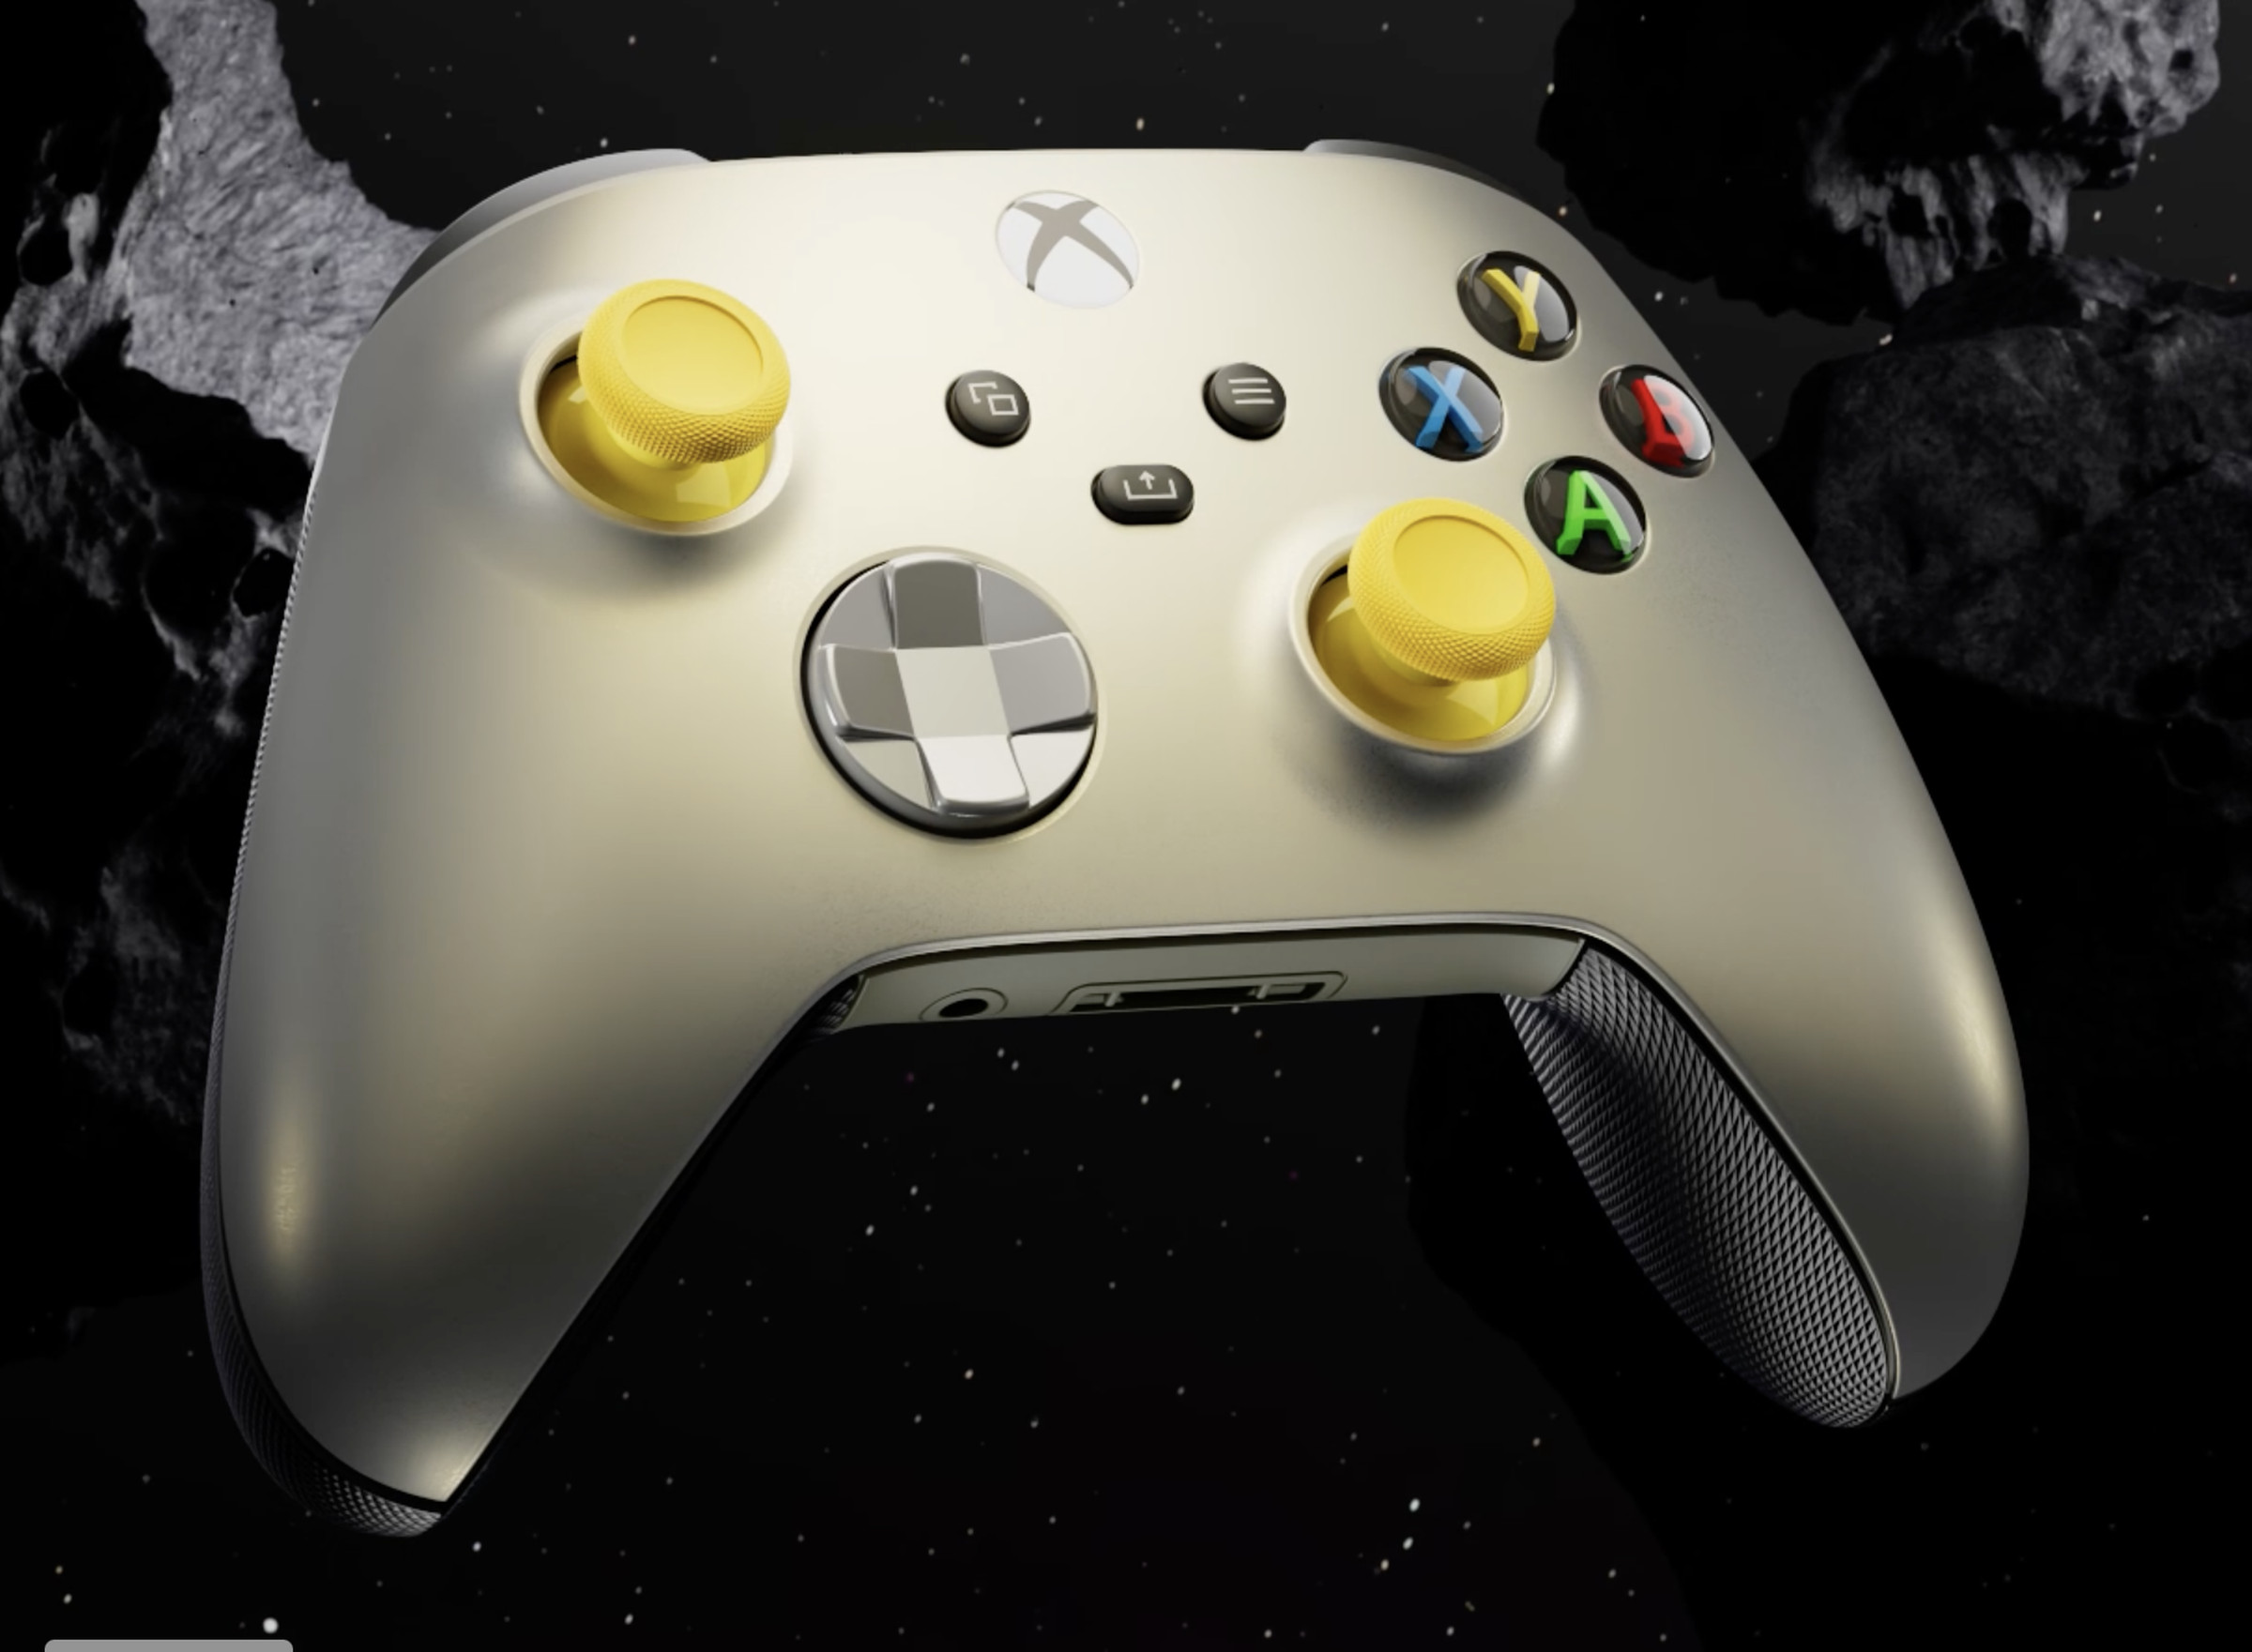 An Xbox controller sporting the golden Lunar Shift colorway.